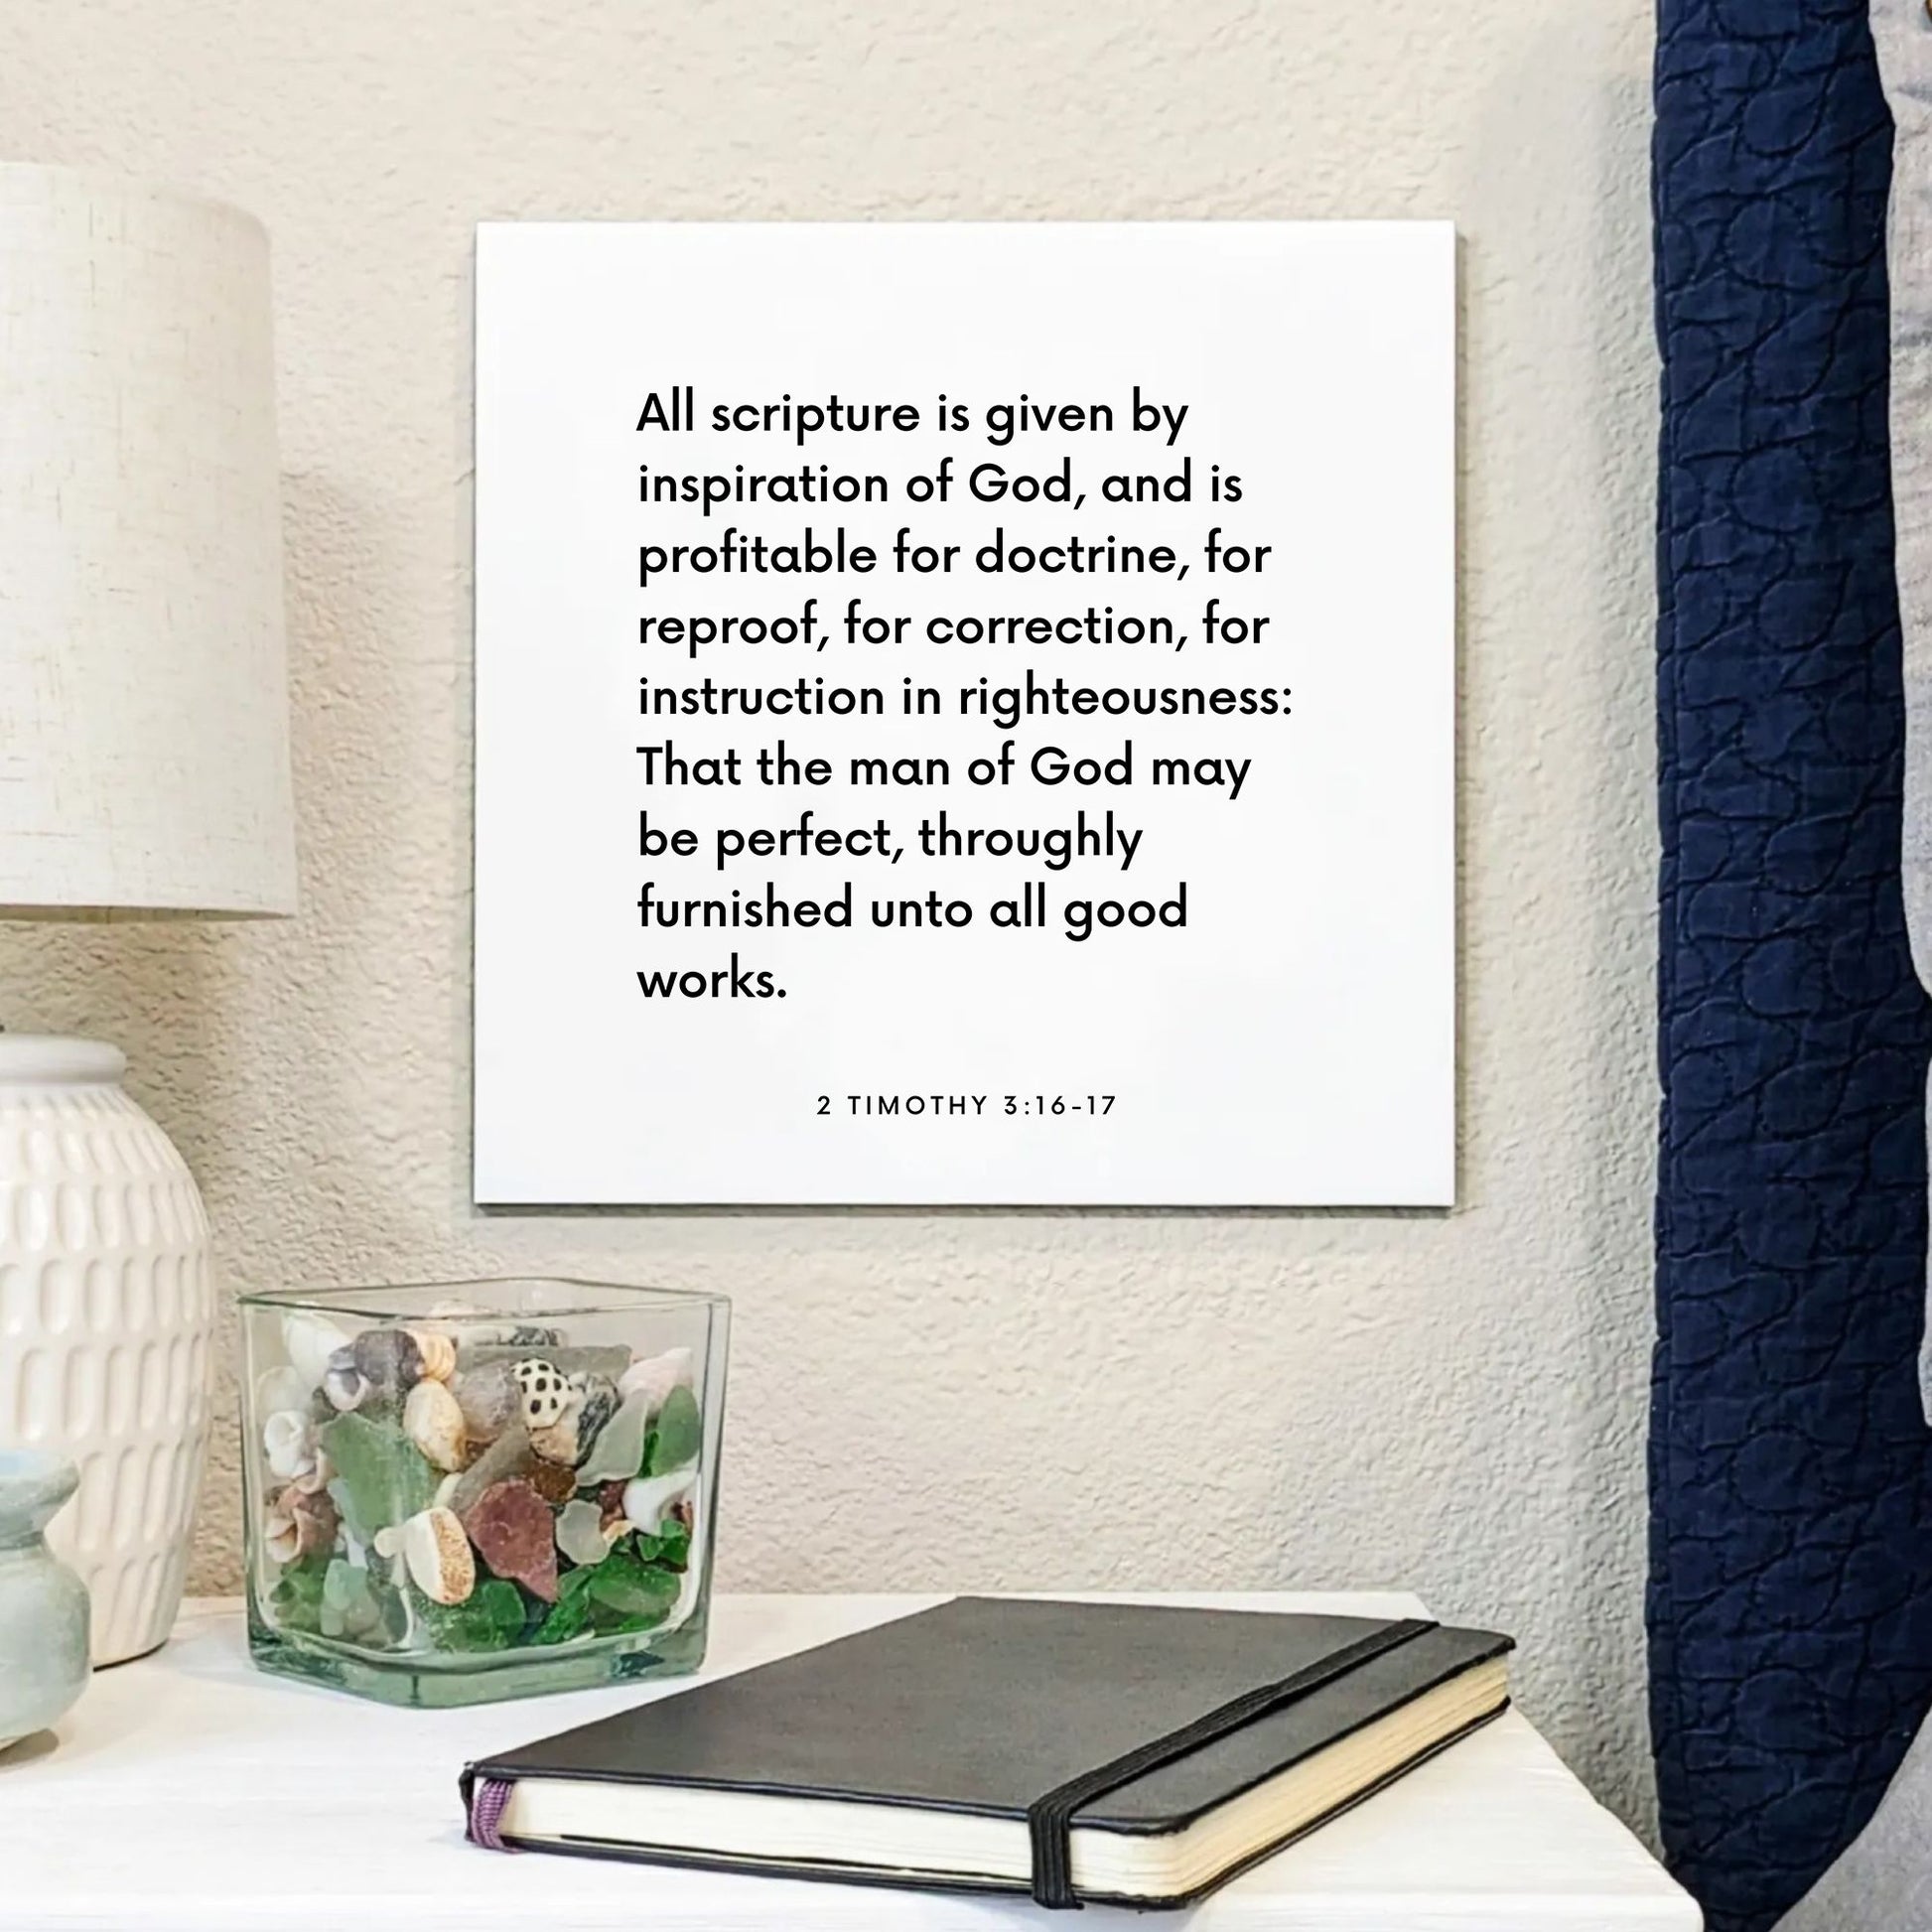 Bedside mouting of the scripture tile for 2 Timothy 3:16-17 - "All scripture is given by inspiration of God"